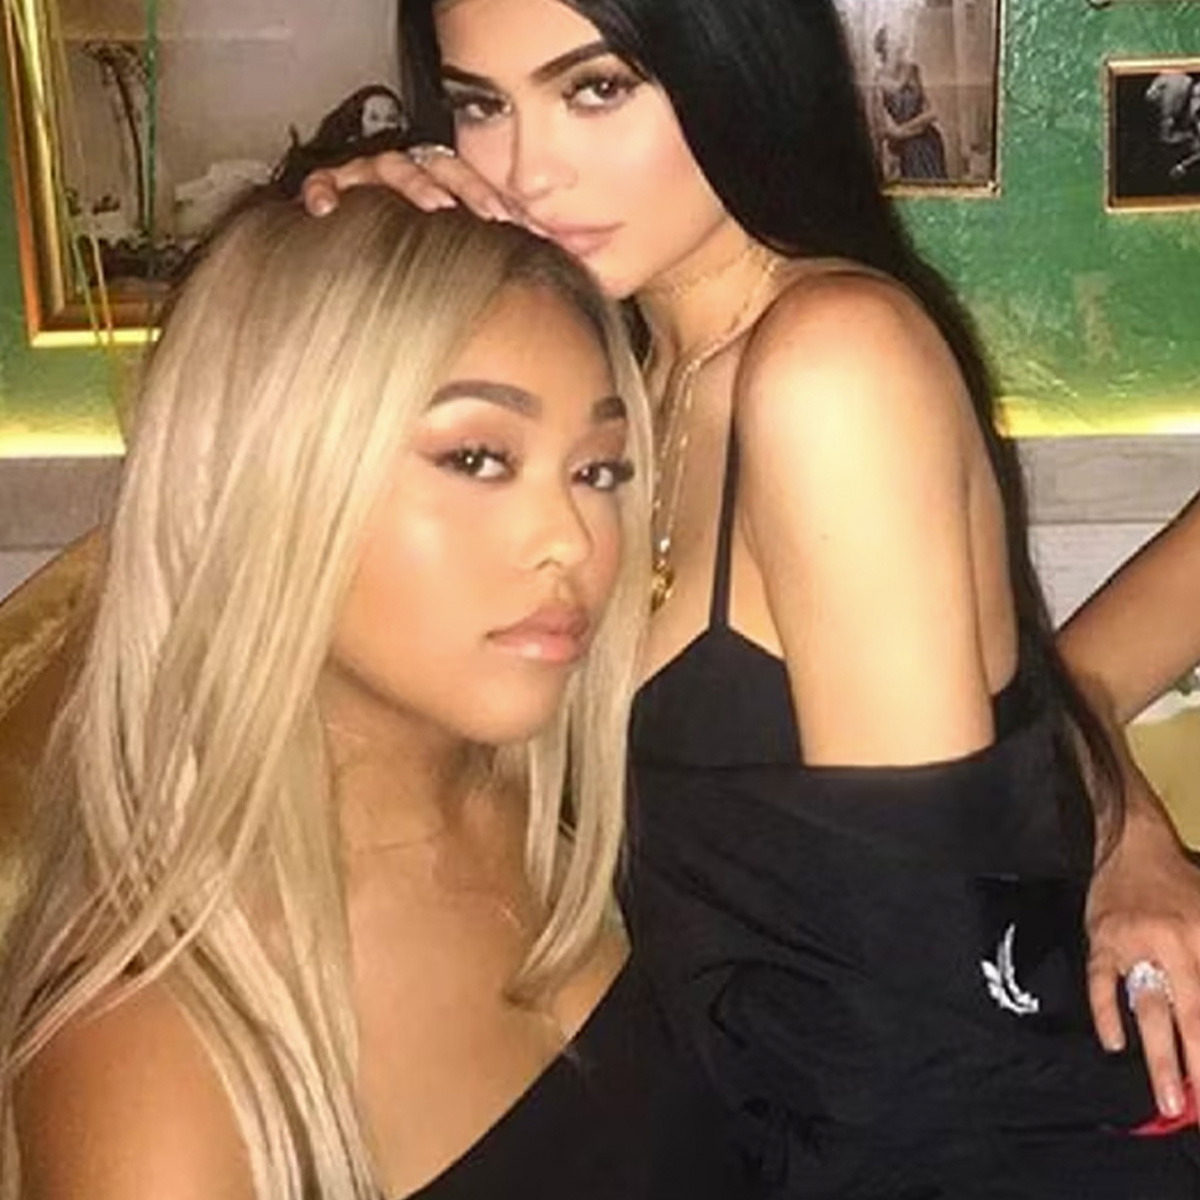 Are Kylie Jenner & Jordyn Woods on Speaking Terms? There's Been an